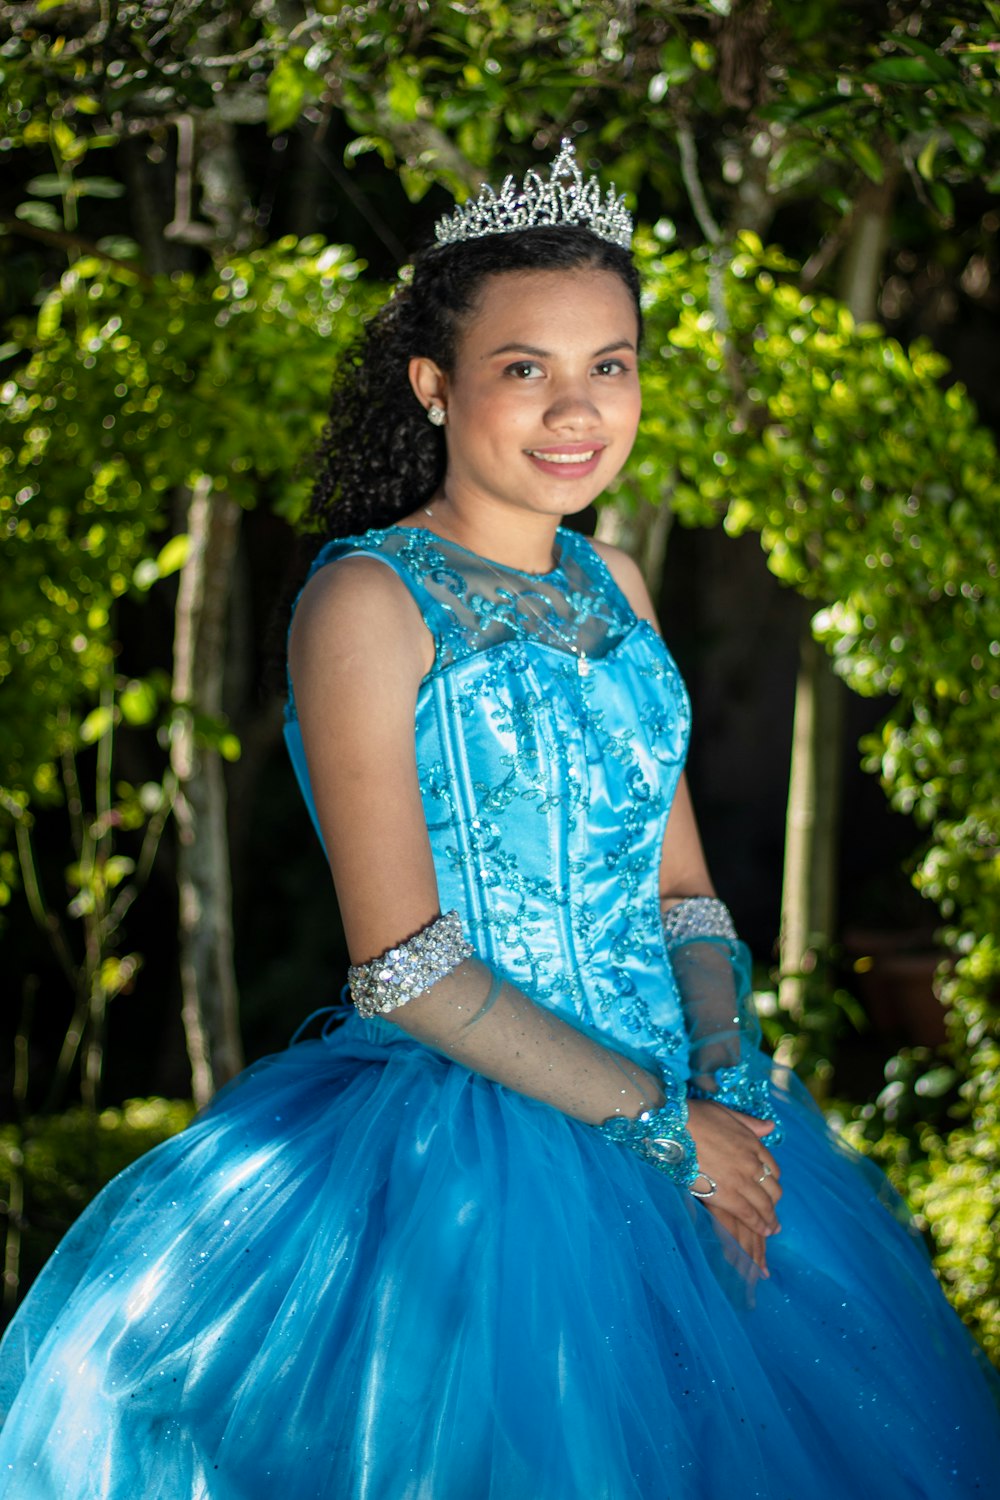 a young girl wearing a blue dress and a tiara